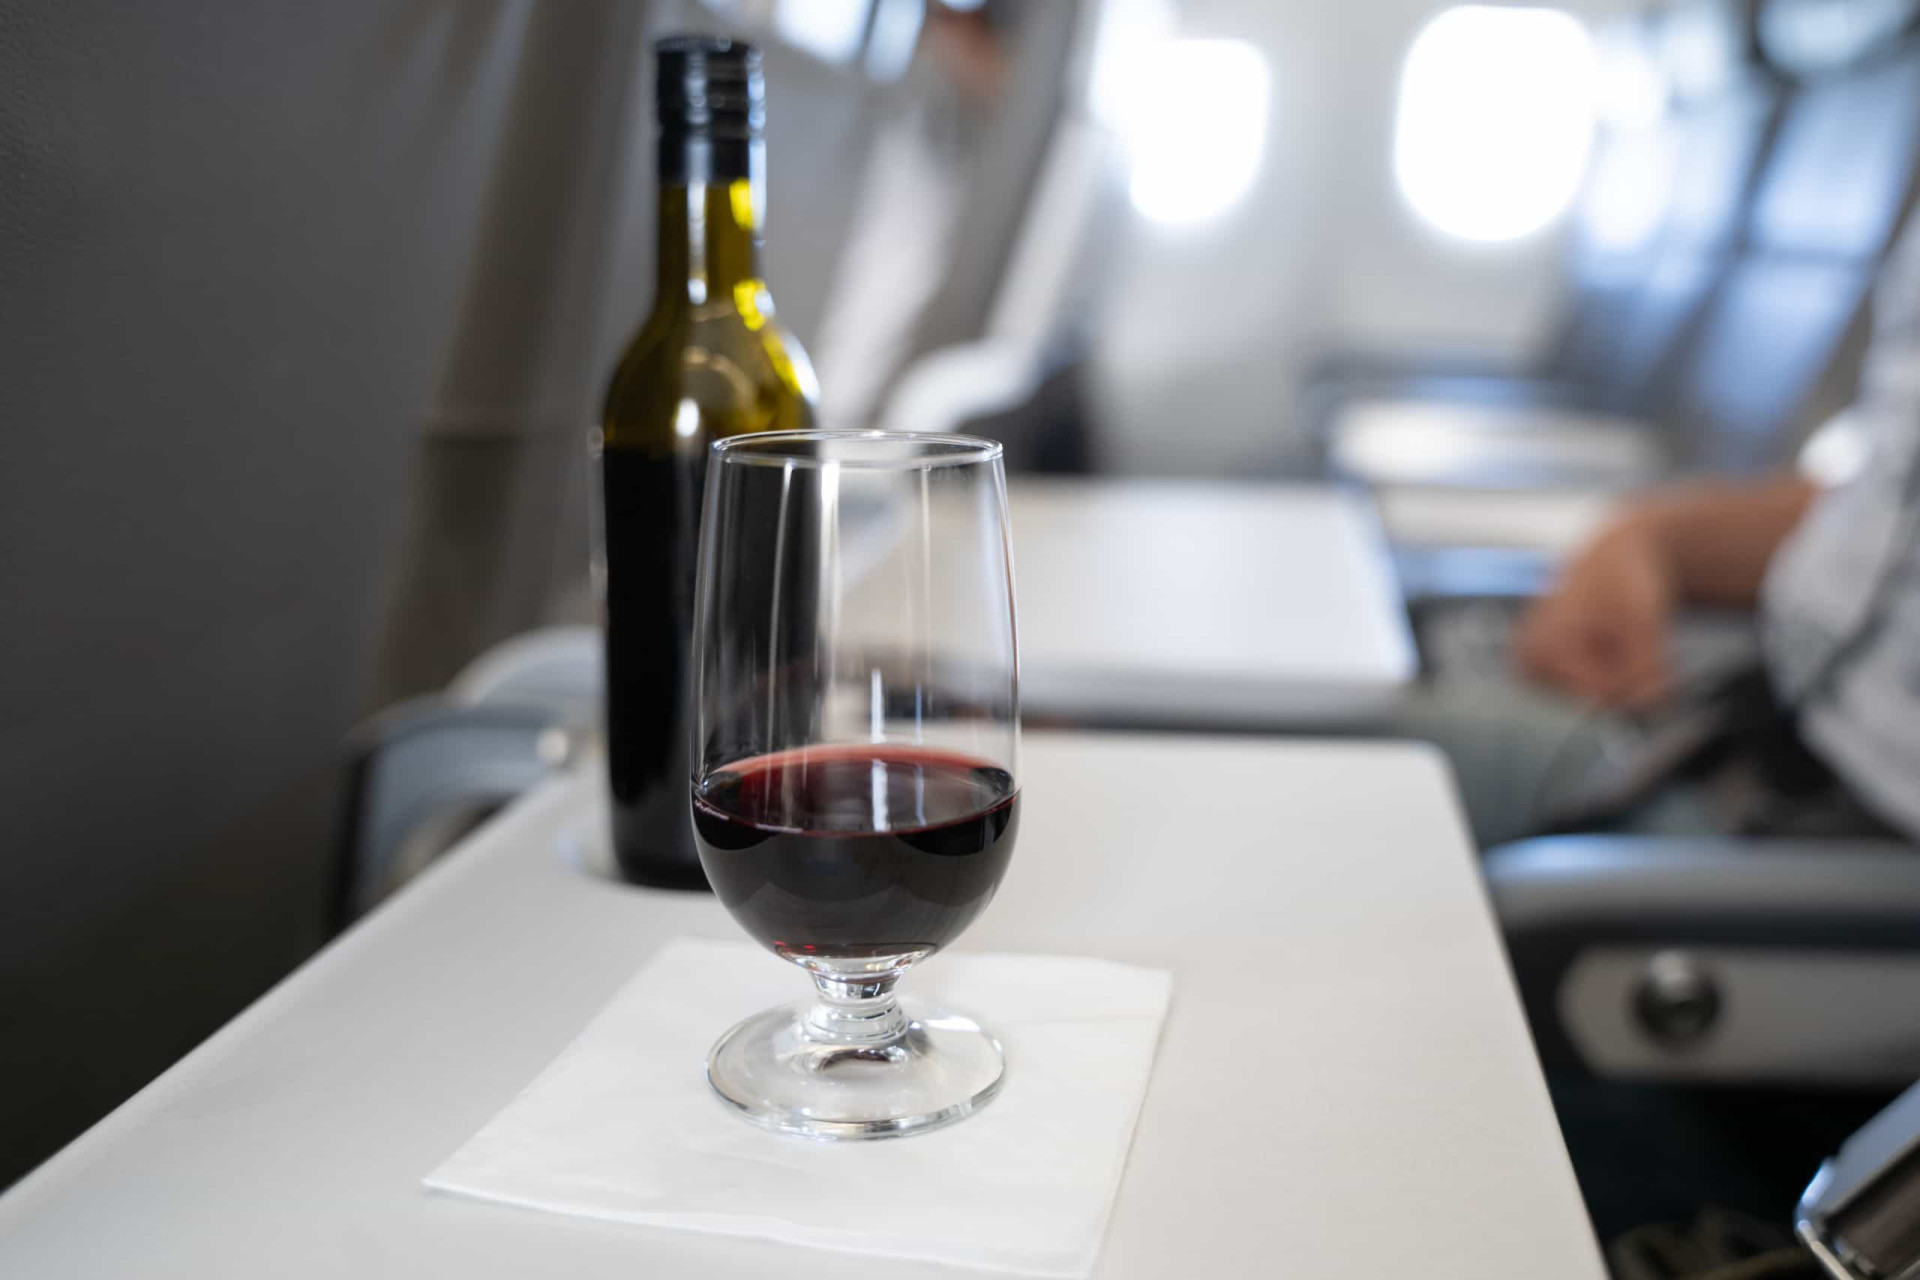 <p>Some people enjoy a glass of wine or beer, often free on international flights, to accompany their in-flight meals and entertainment. Don't be afraid to enjoy a glass!</p><p><a href="https://www.msn.com/en-us/community/channel/vid-7xx8mnucu55yw63we9va2gwr7uihbxwc68fxqp25x6tg4ftibpra?cvid=94631541bc0f4f89bfd59158d696ad7e">Follow us and access great exclusive content every day</a></p>